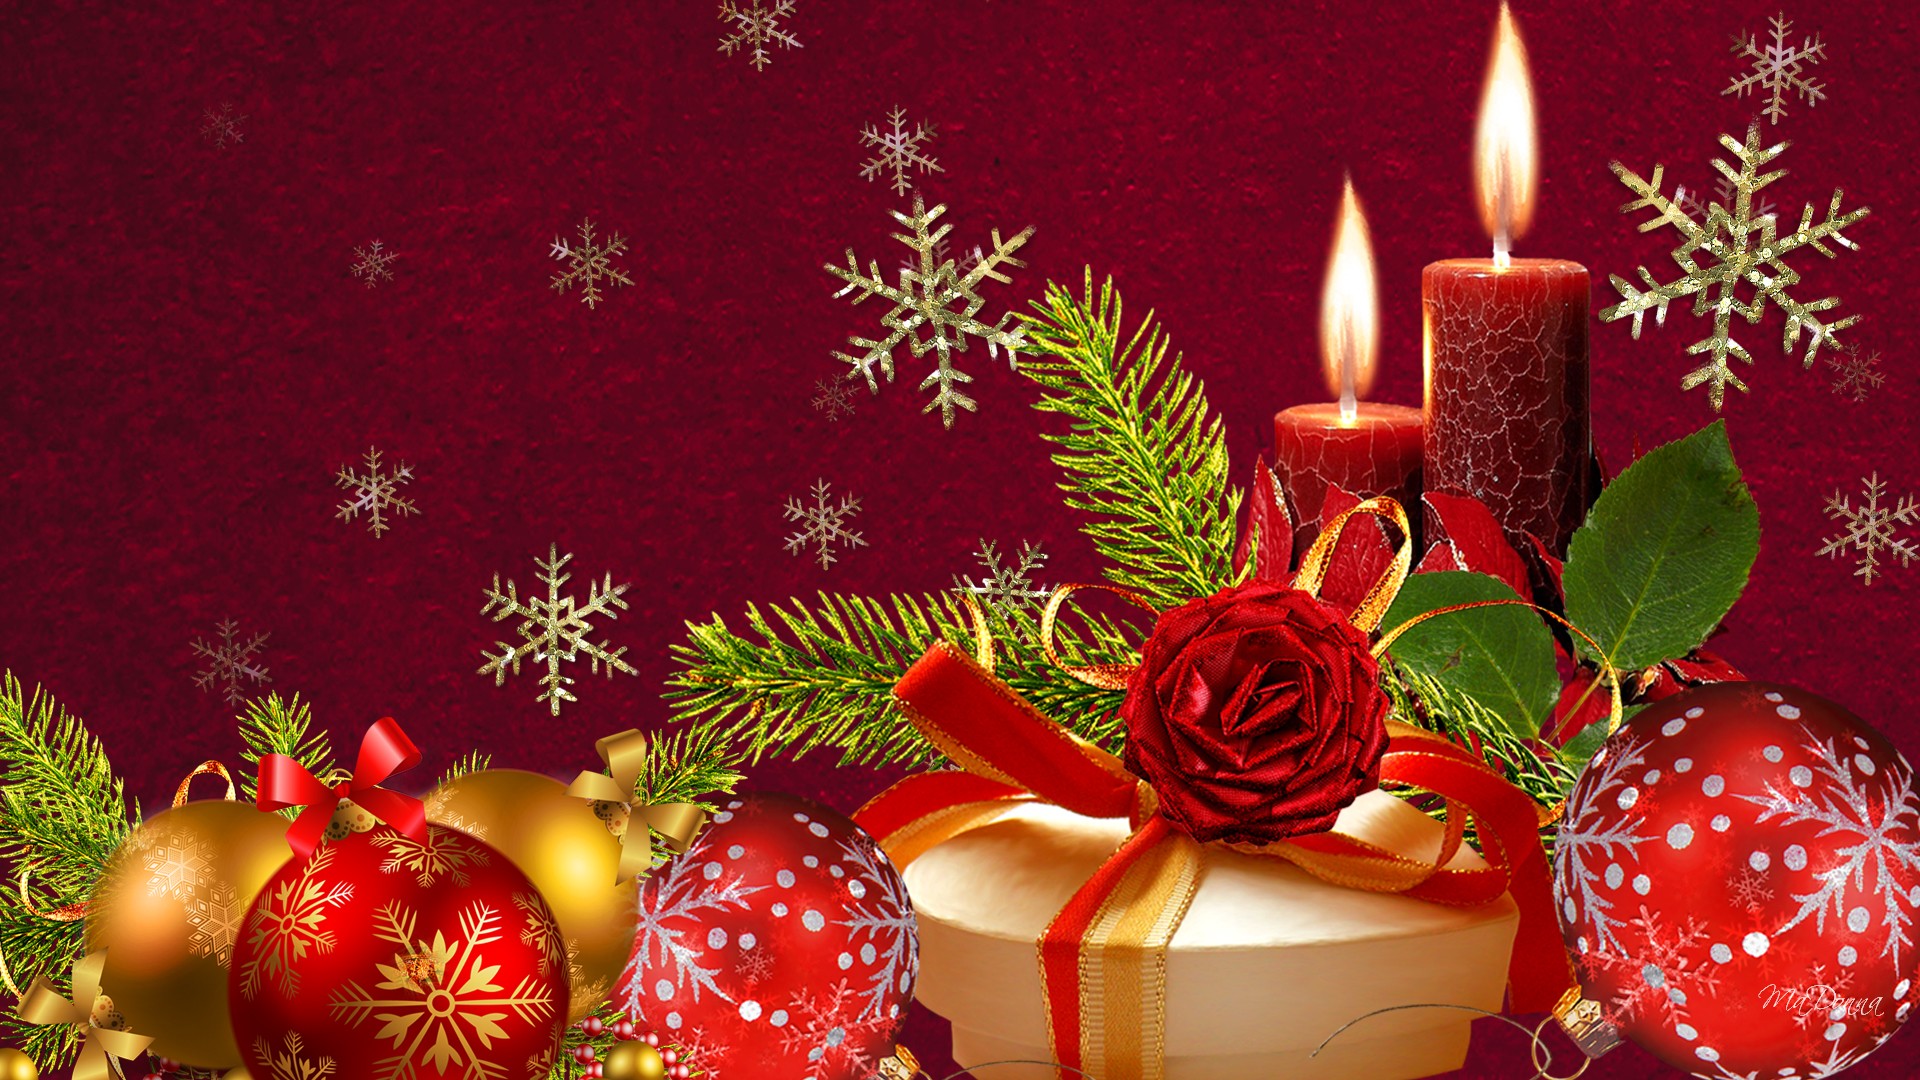 Free Christmas Backgrounds Images #7017946